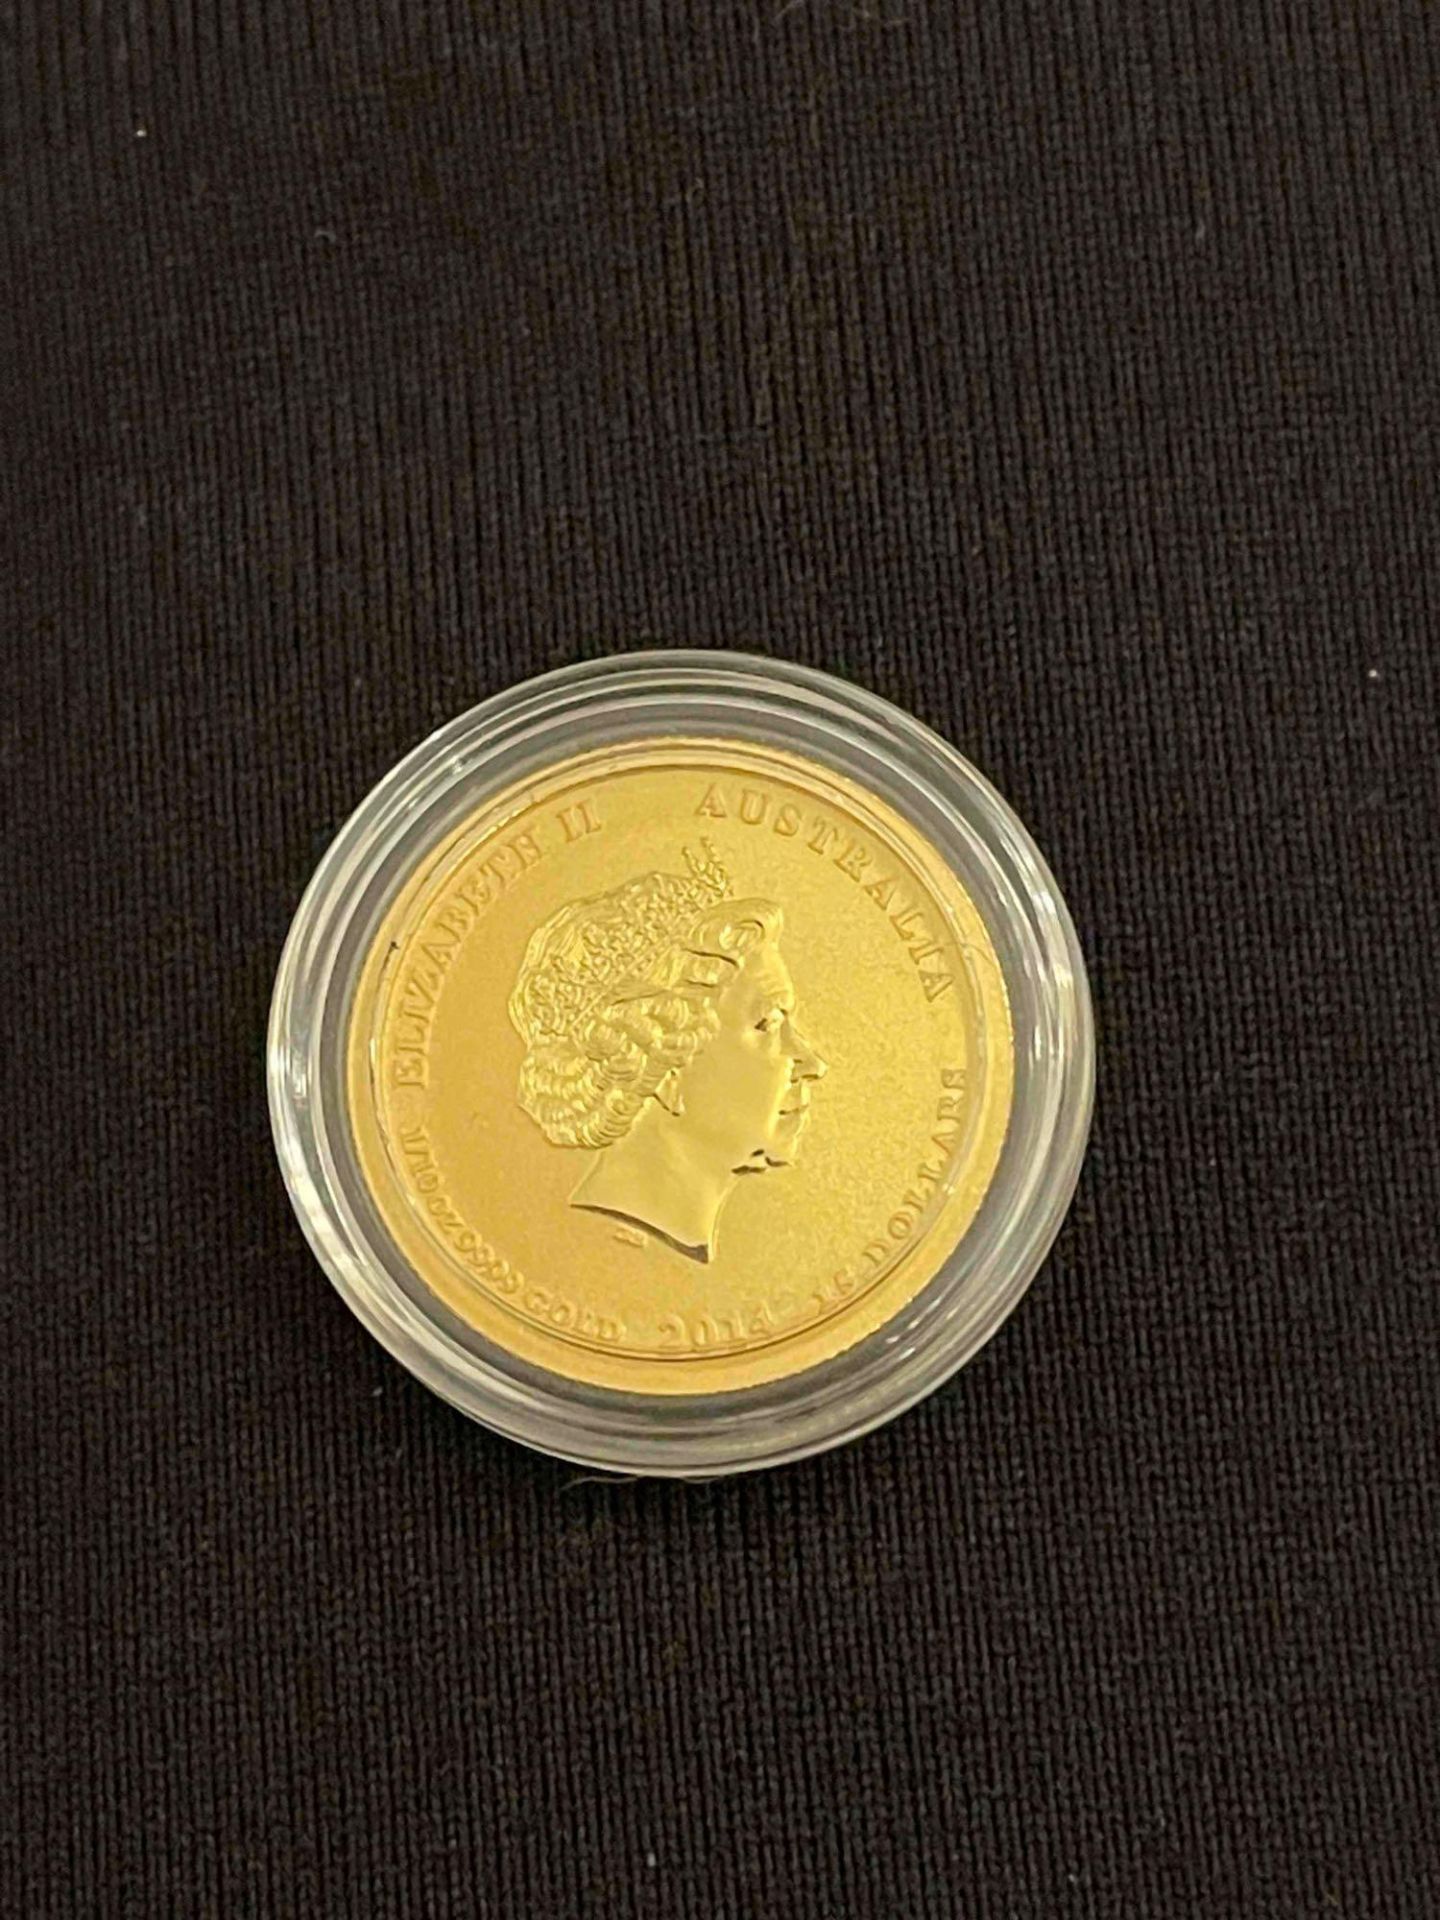 1/10 oz Gold Coin - Image 3 of 4